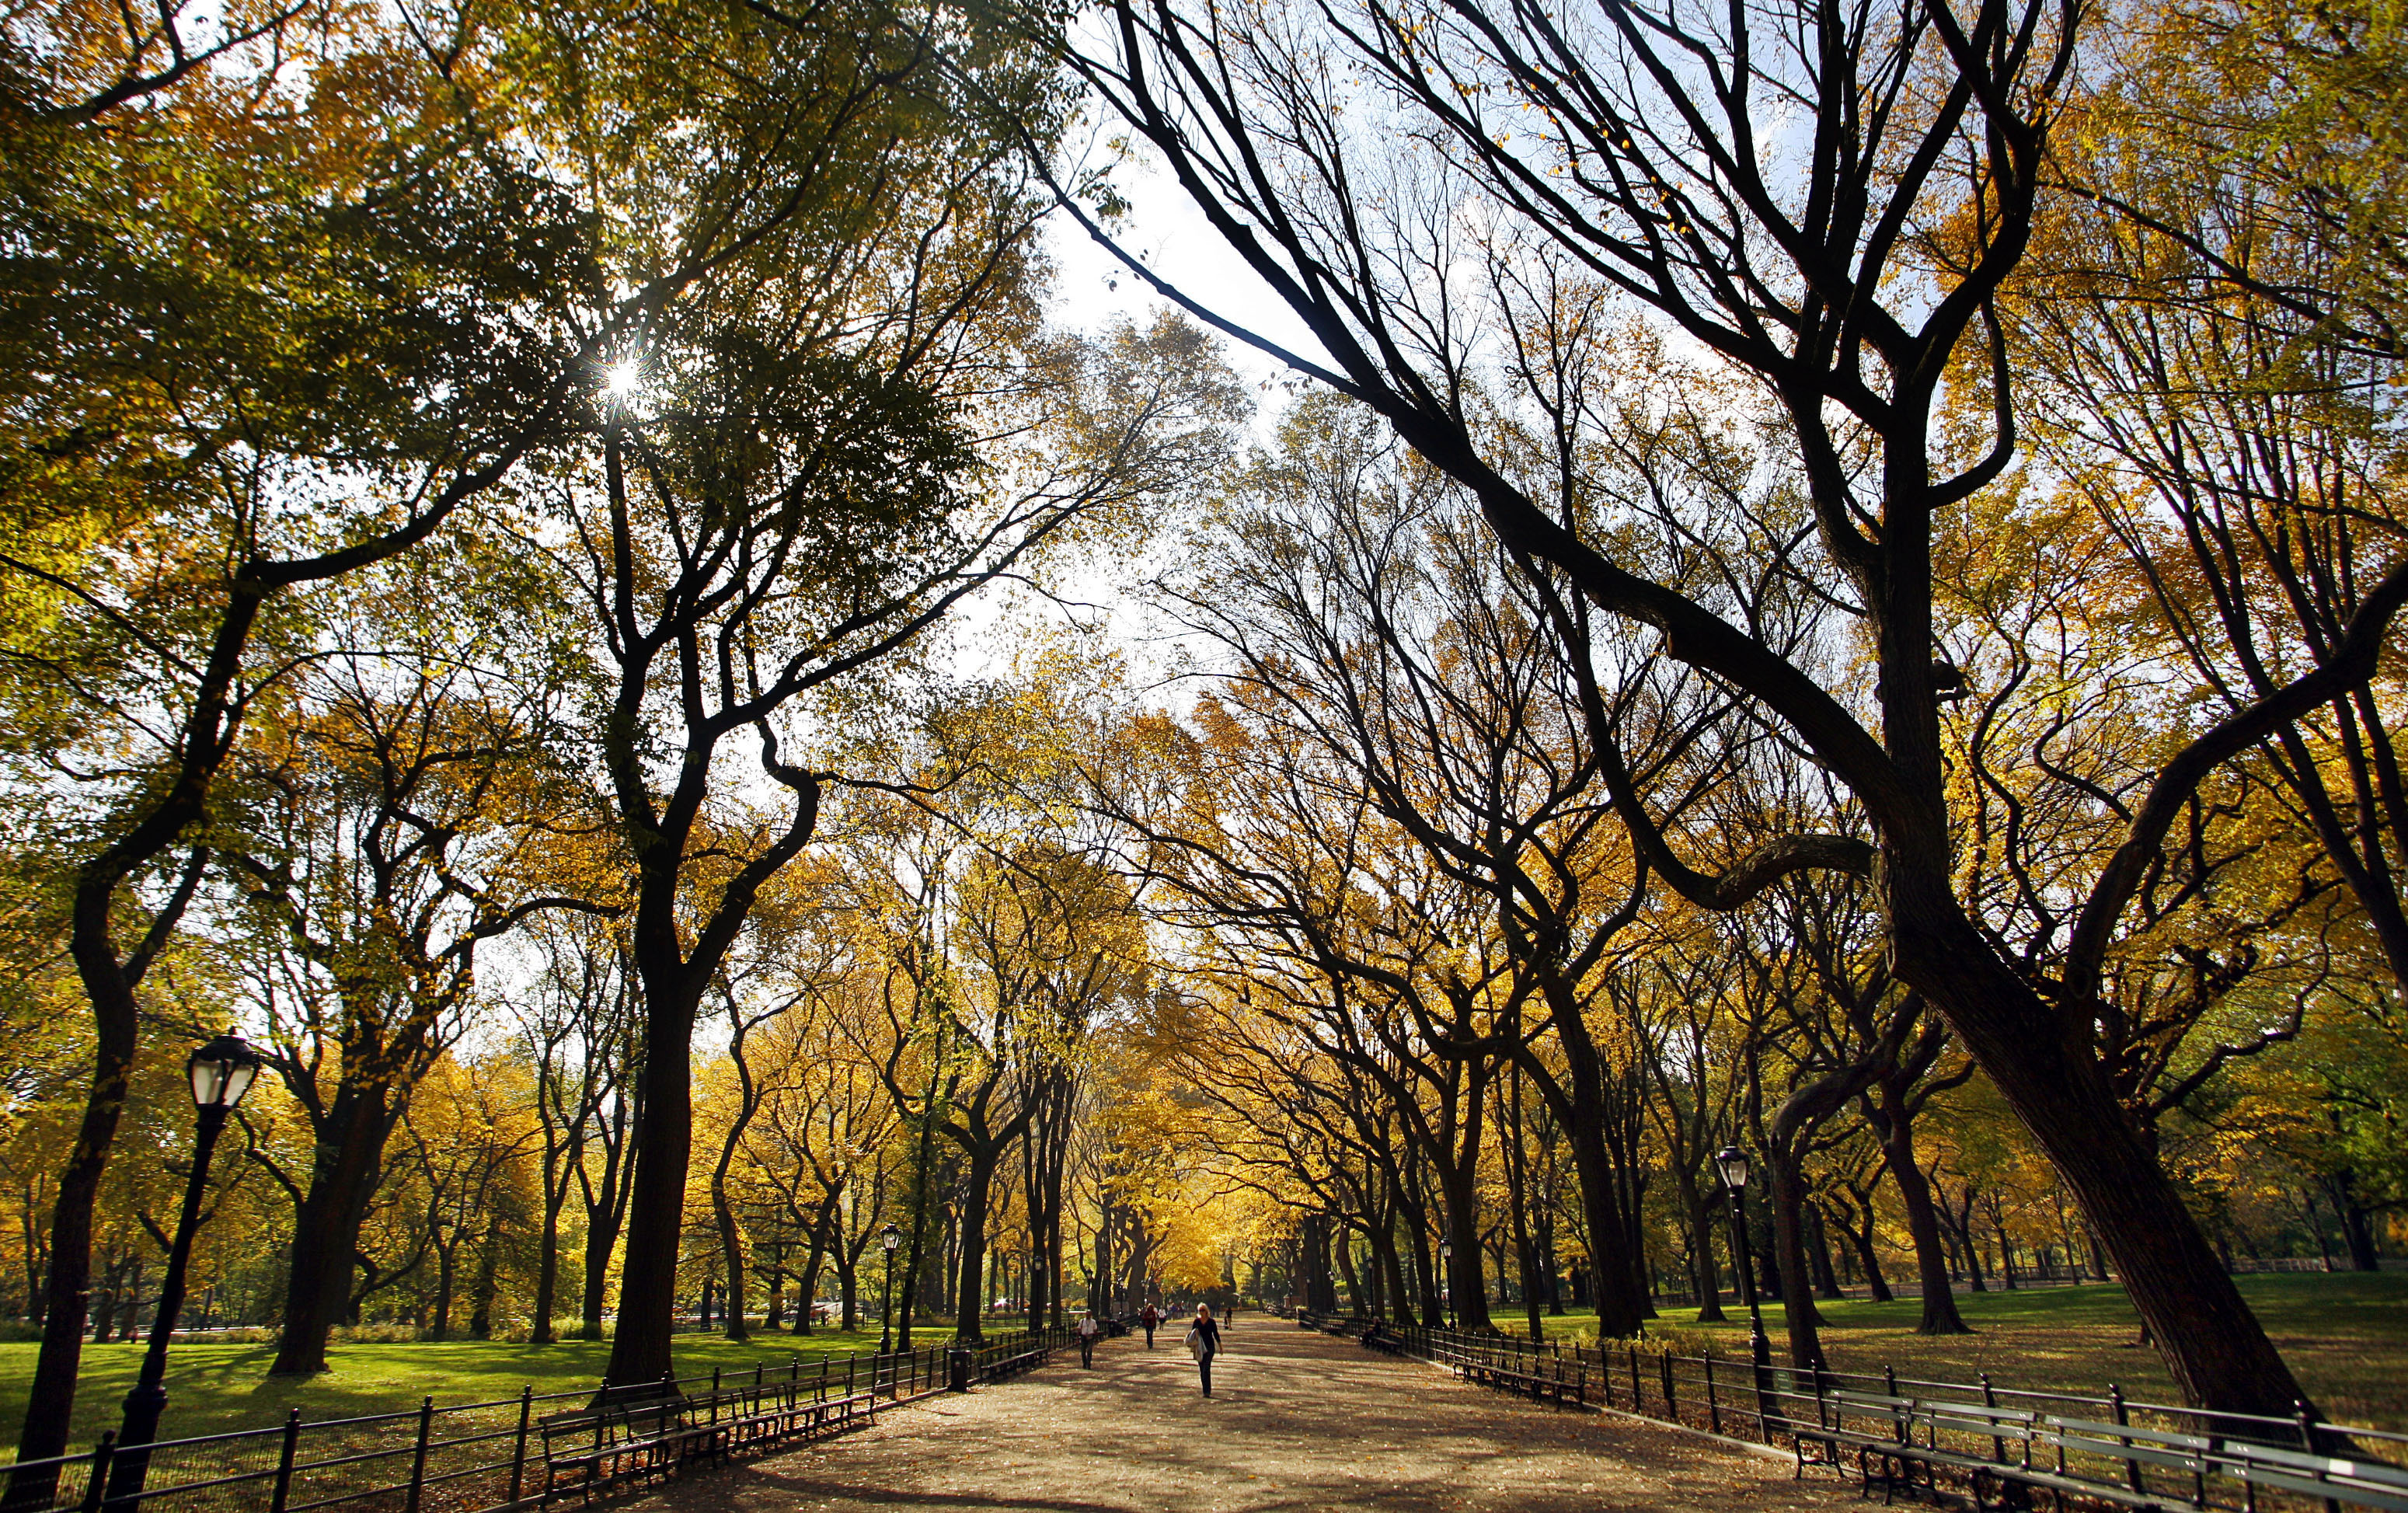 American elm trees are dying out, but there may be a way to save them.